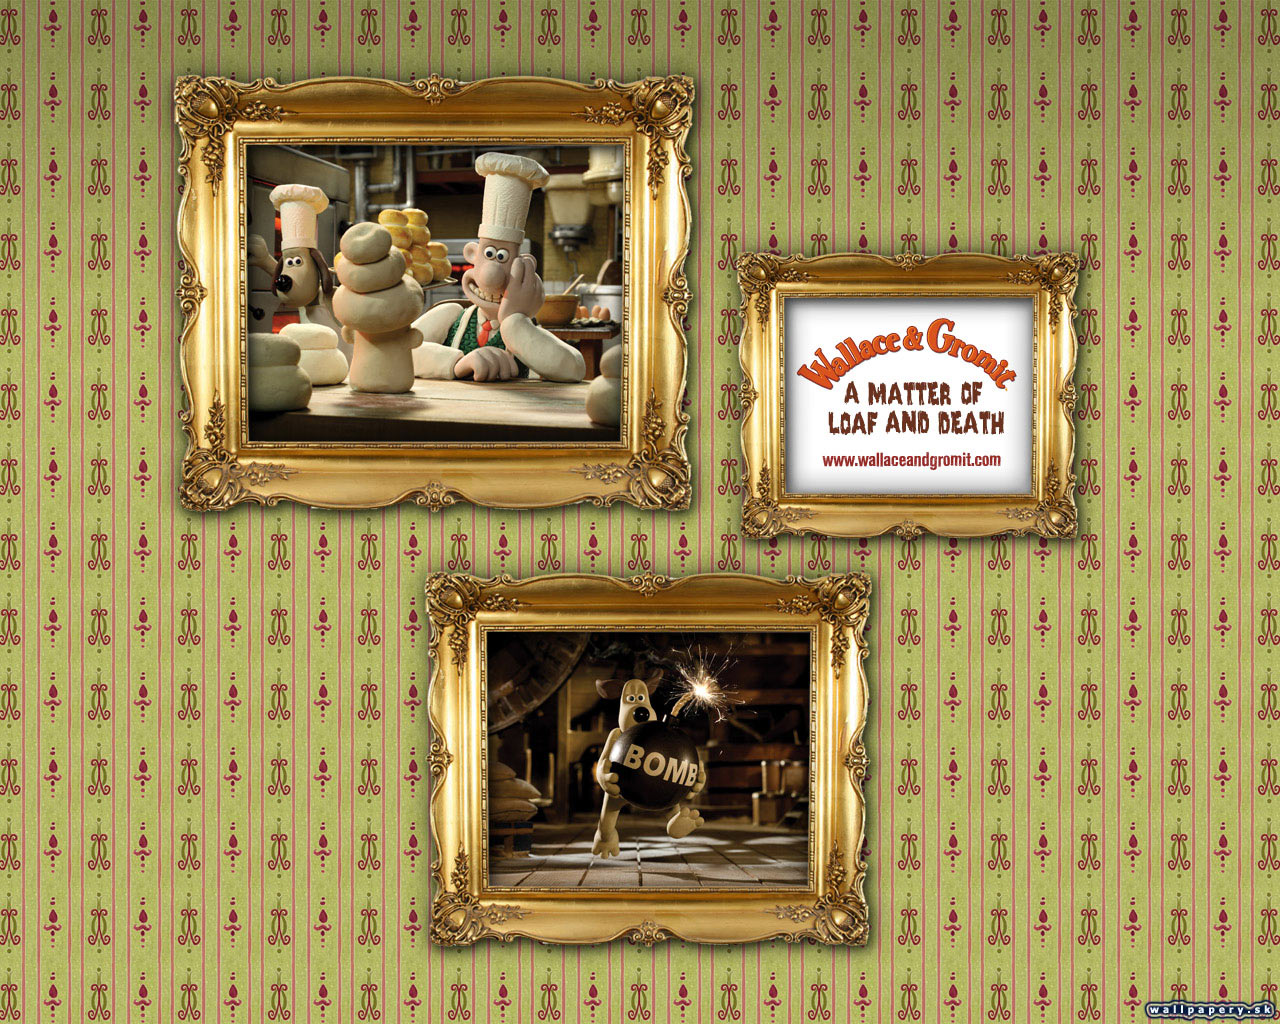 Wallace & Gromit Episode 1: Fright of the Bumblebees - wallpaper 9